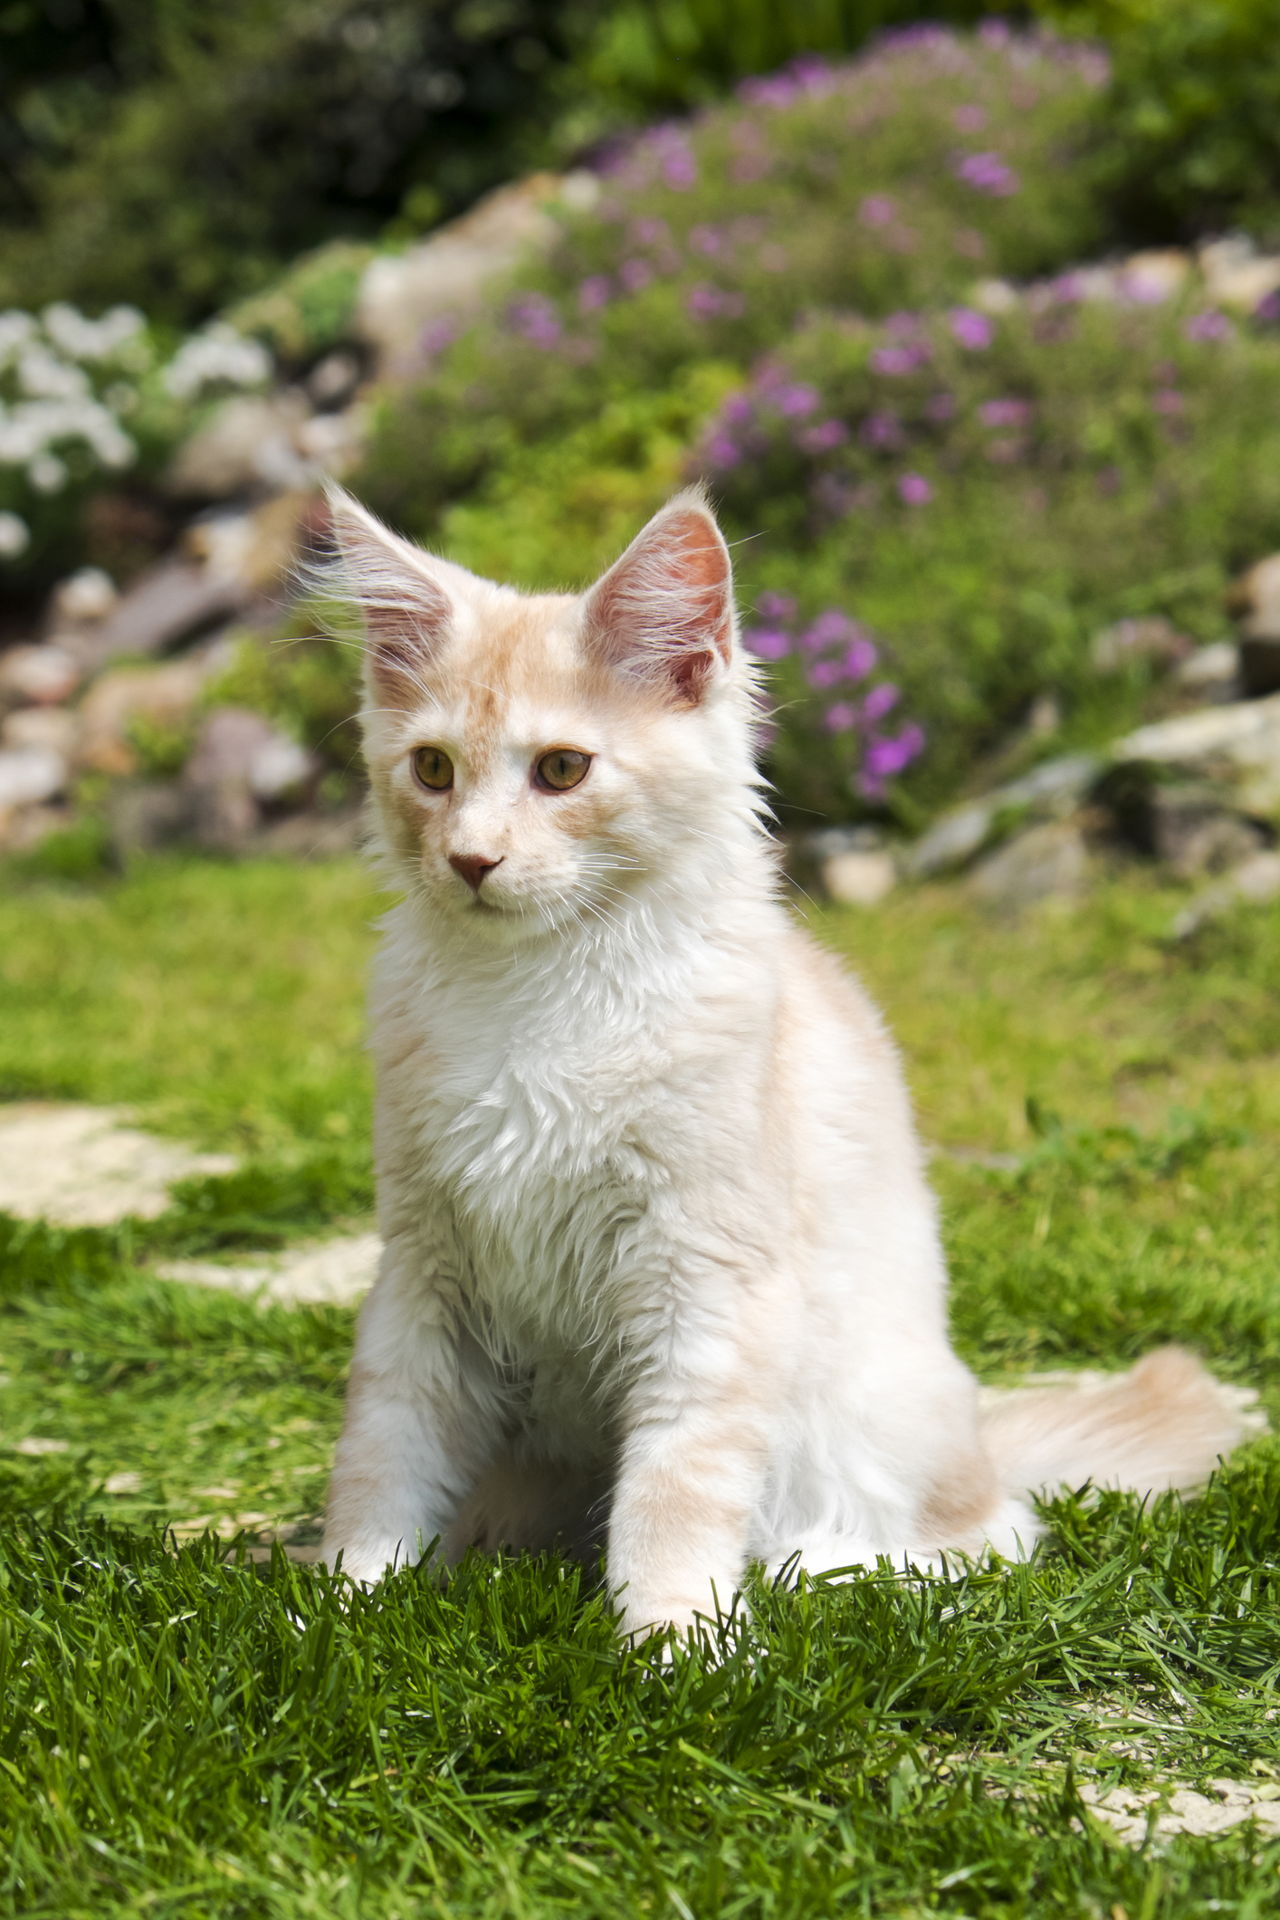 These Facts About White Cat Breeds are Quite Fur-tastic